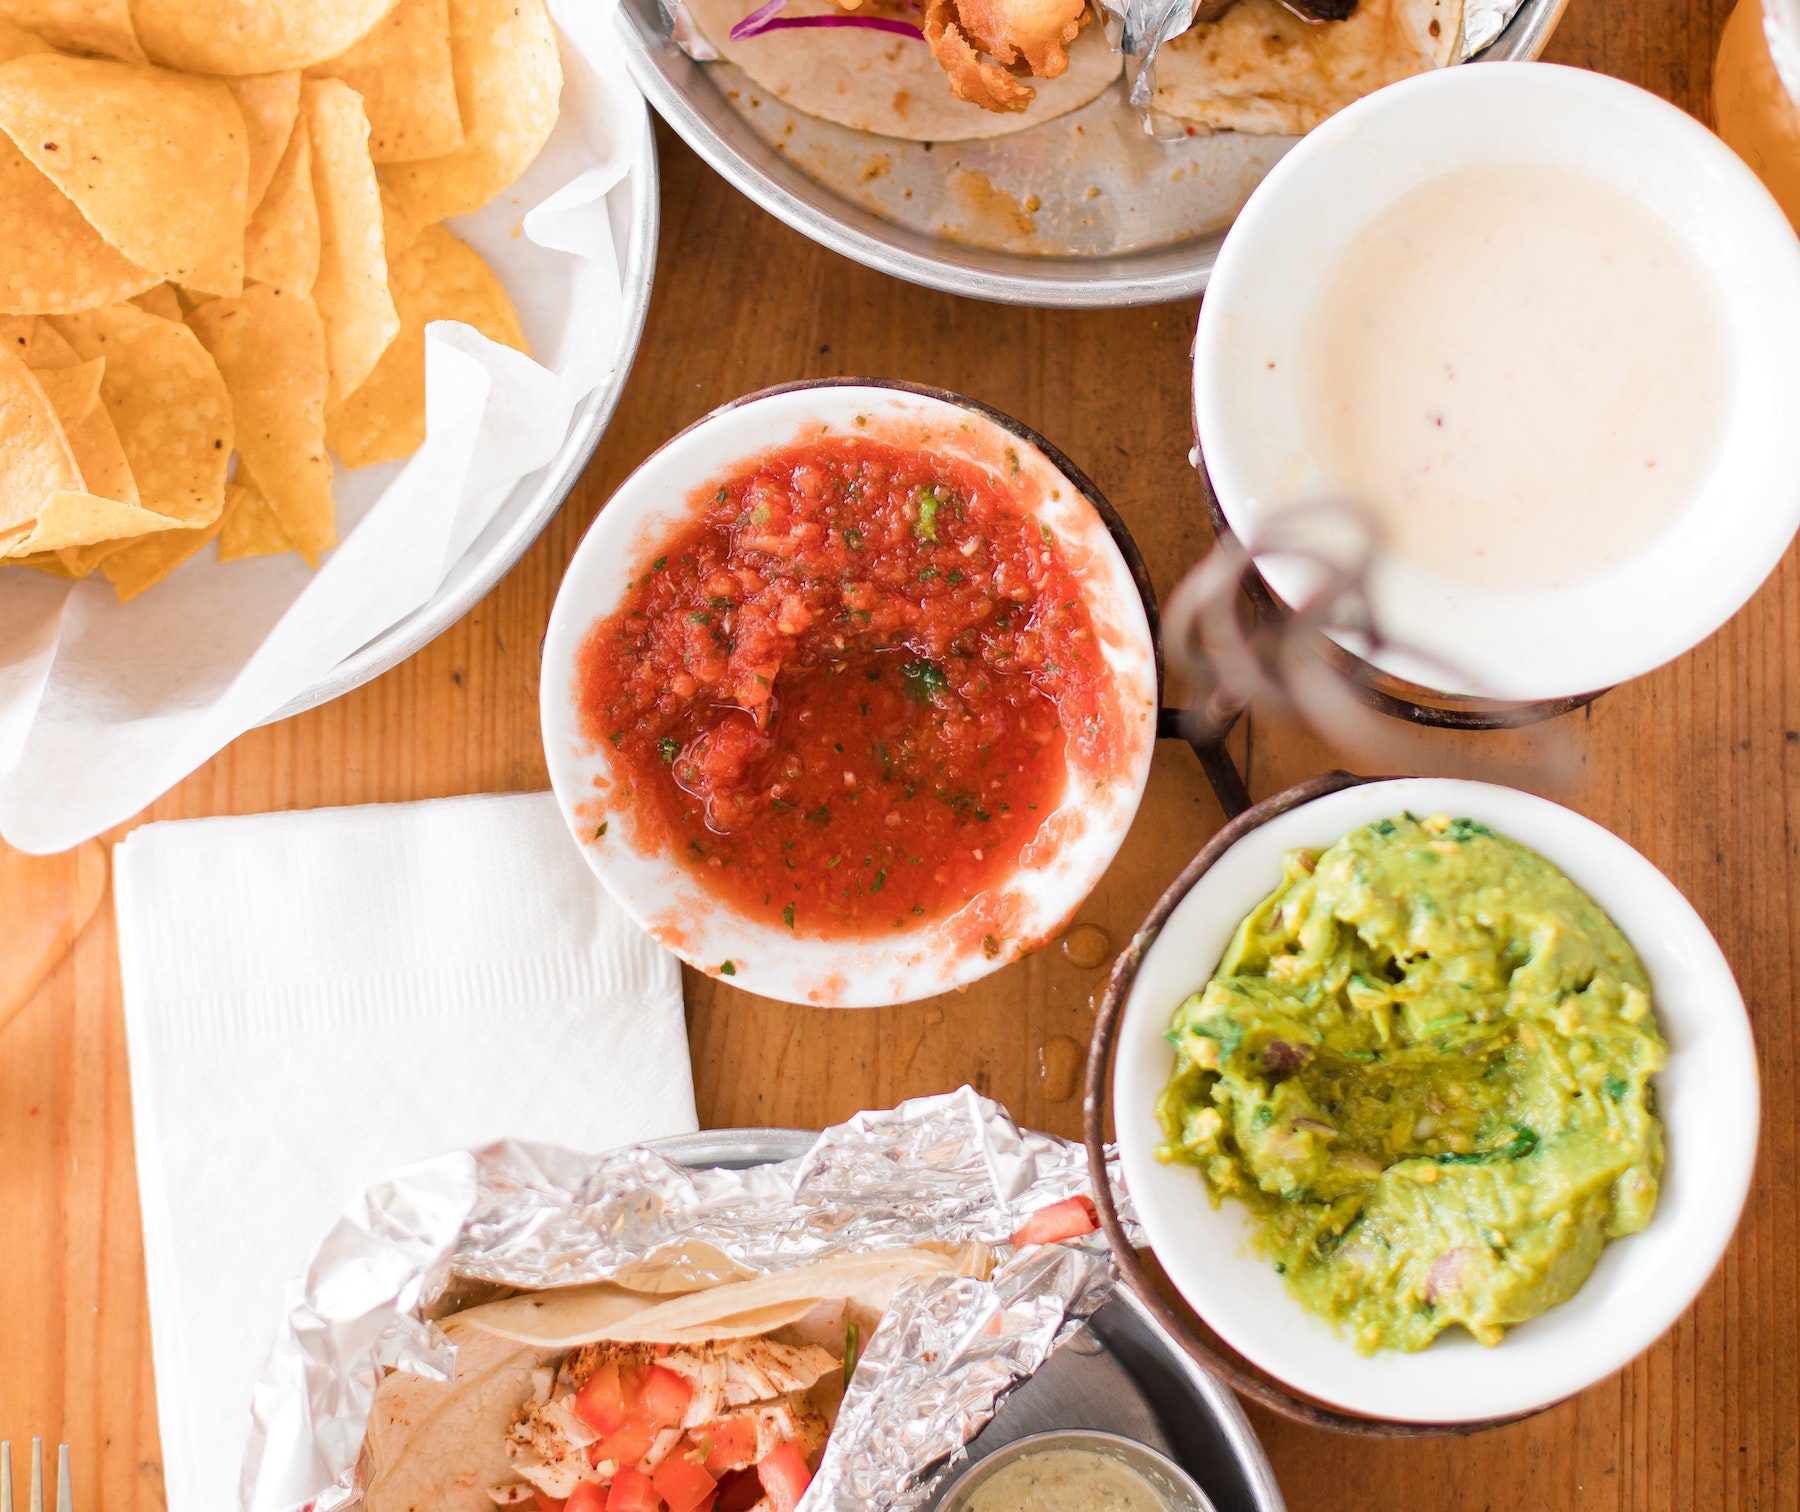 Wooden table filled with a plate of corn chips, burritos in foil, and dishes of salsa, queso, and guacamole. 